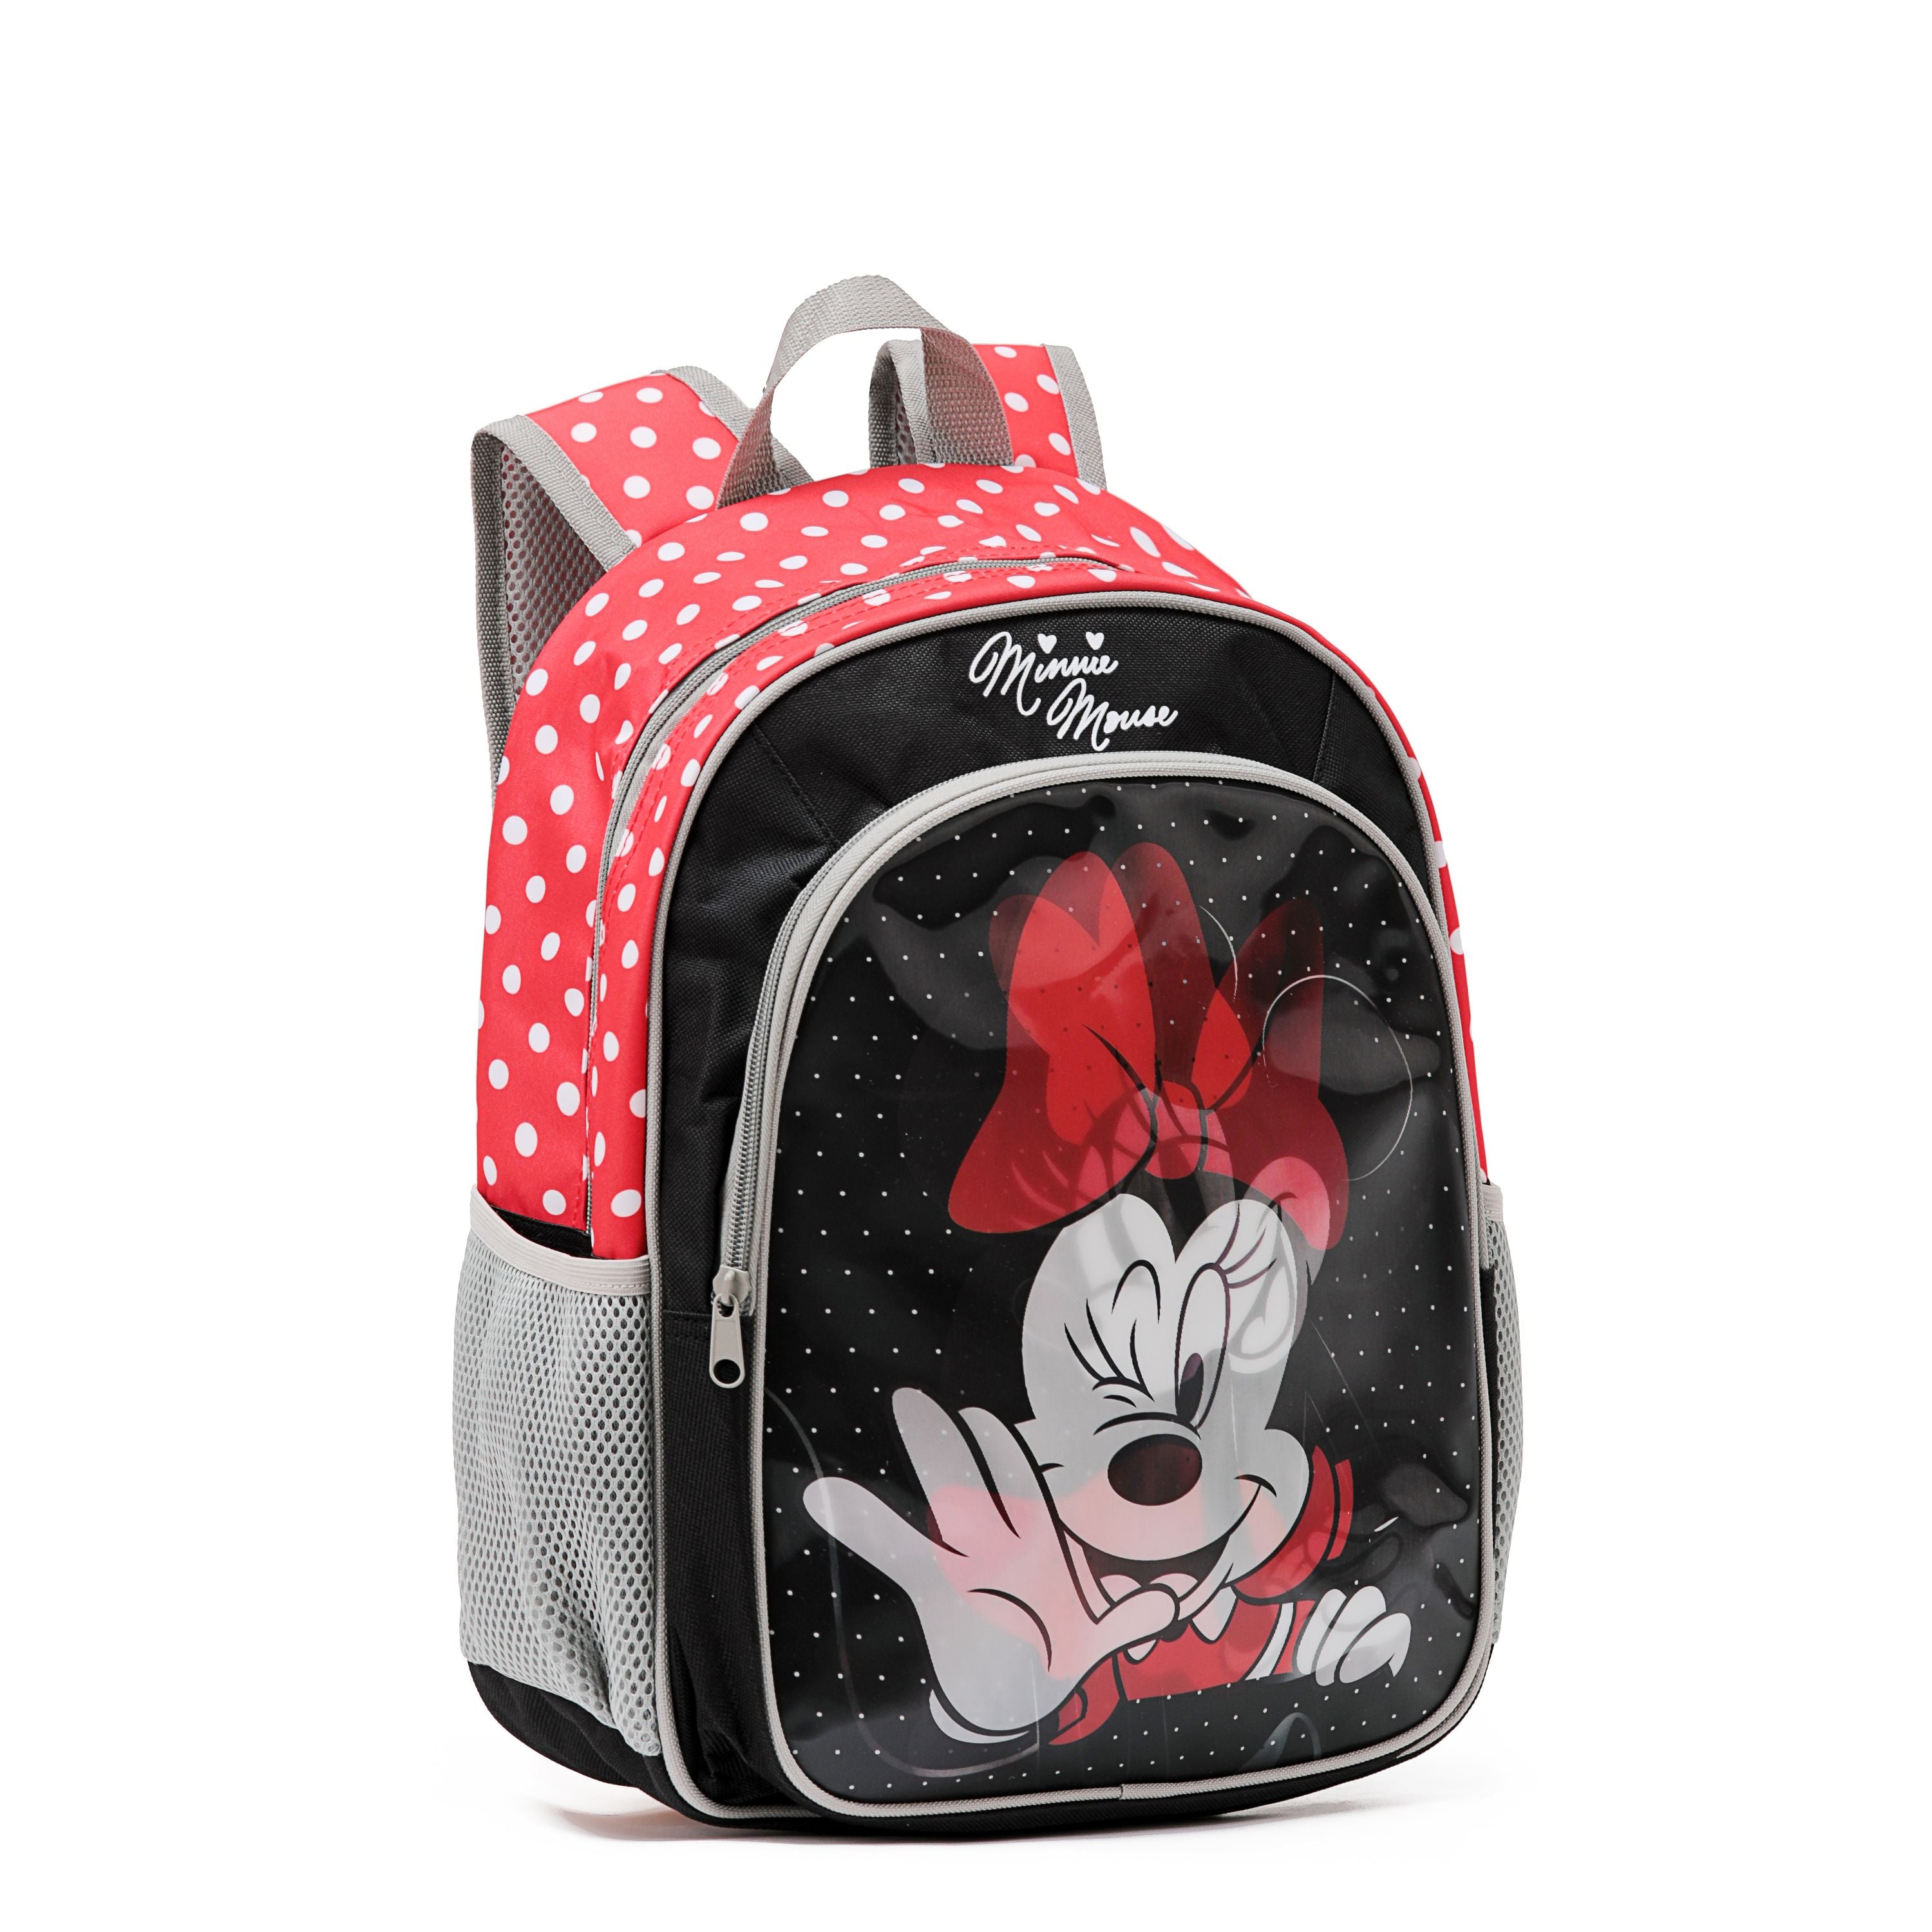 Disney - Minnie Mouse Dis215 15in Hologram backpack - Black/Red